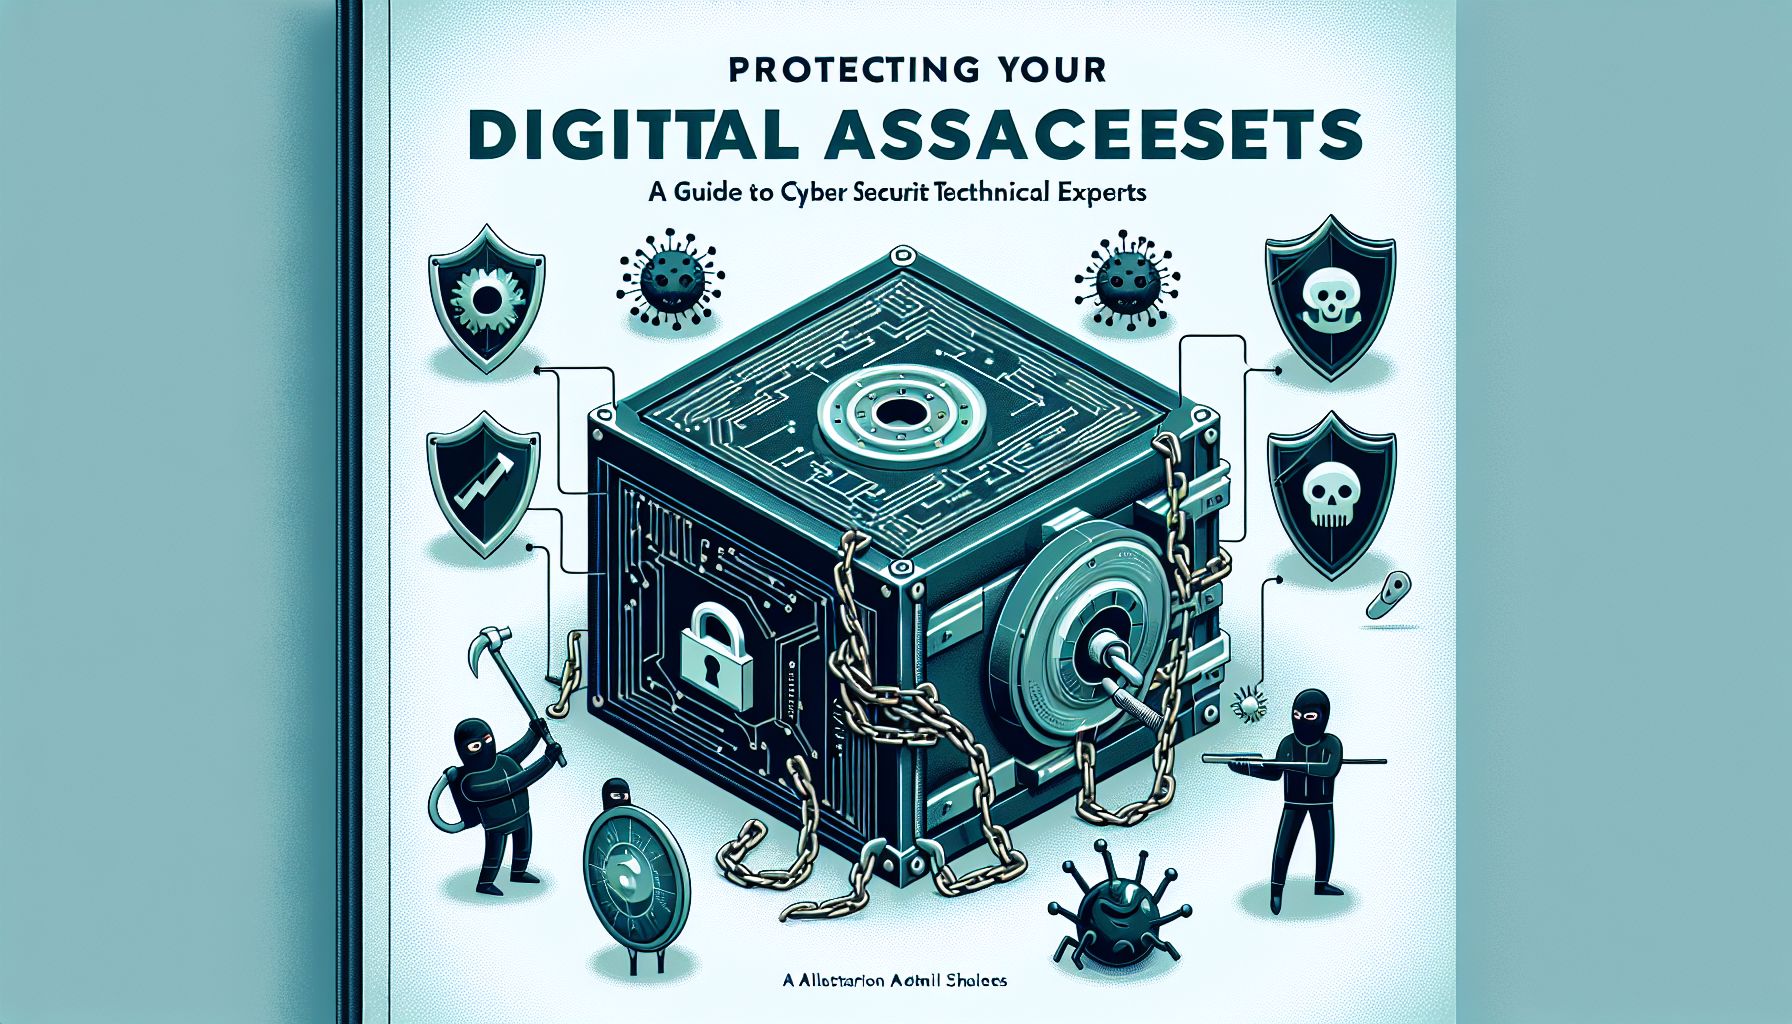 Protecting Your Digital Assets: A Guide to Cyber Security for Technical Experts